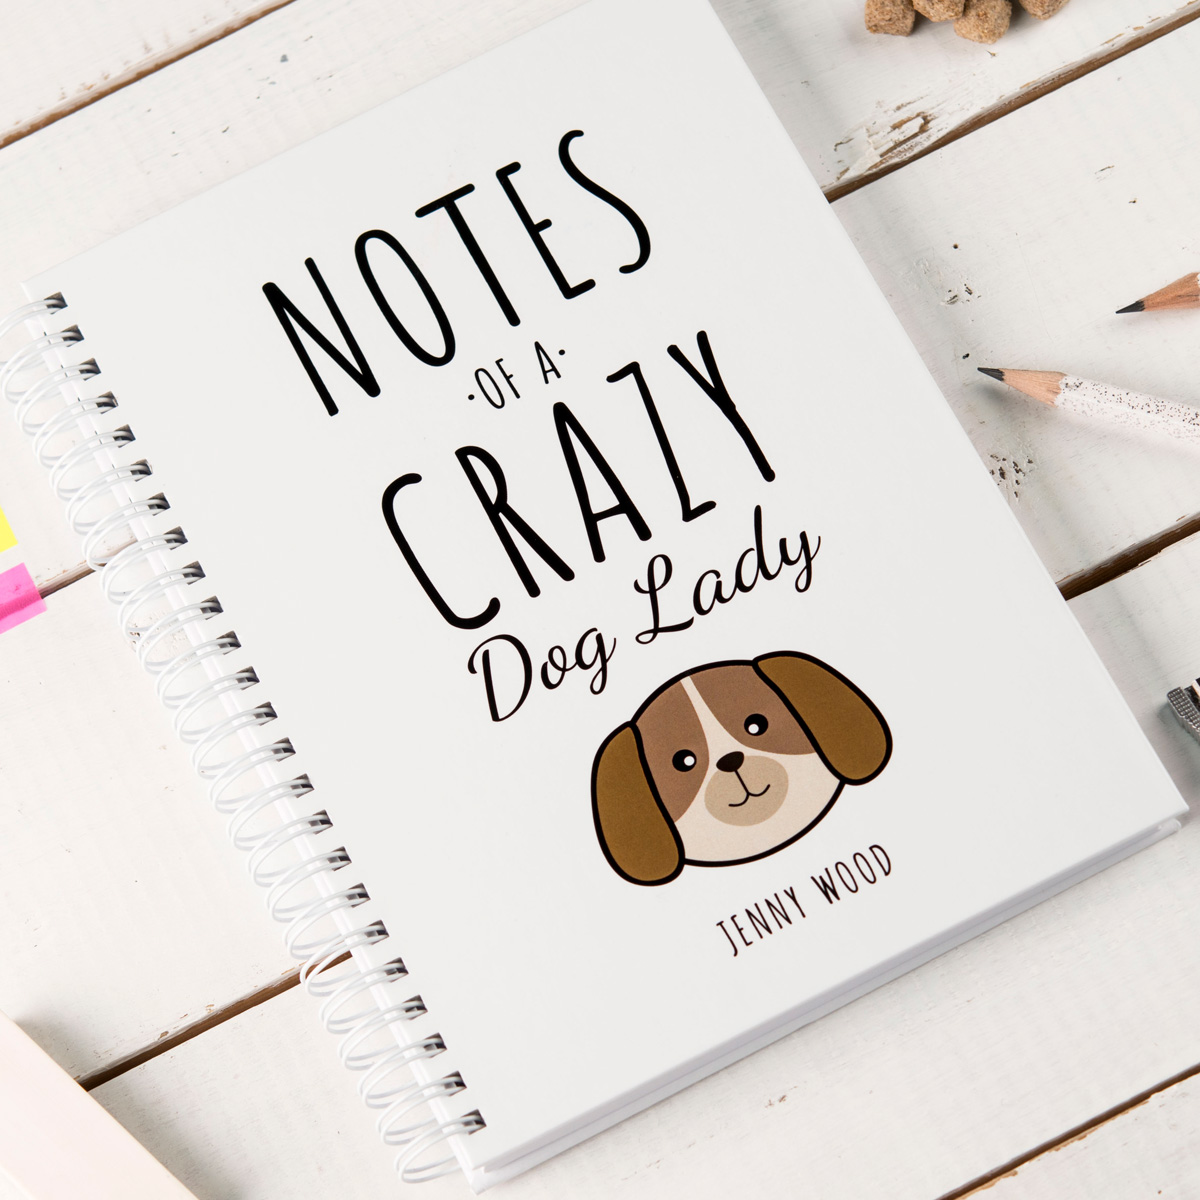 Personalised Notebook - Notes Of A Crazy Dog Lady